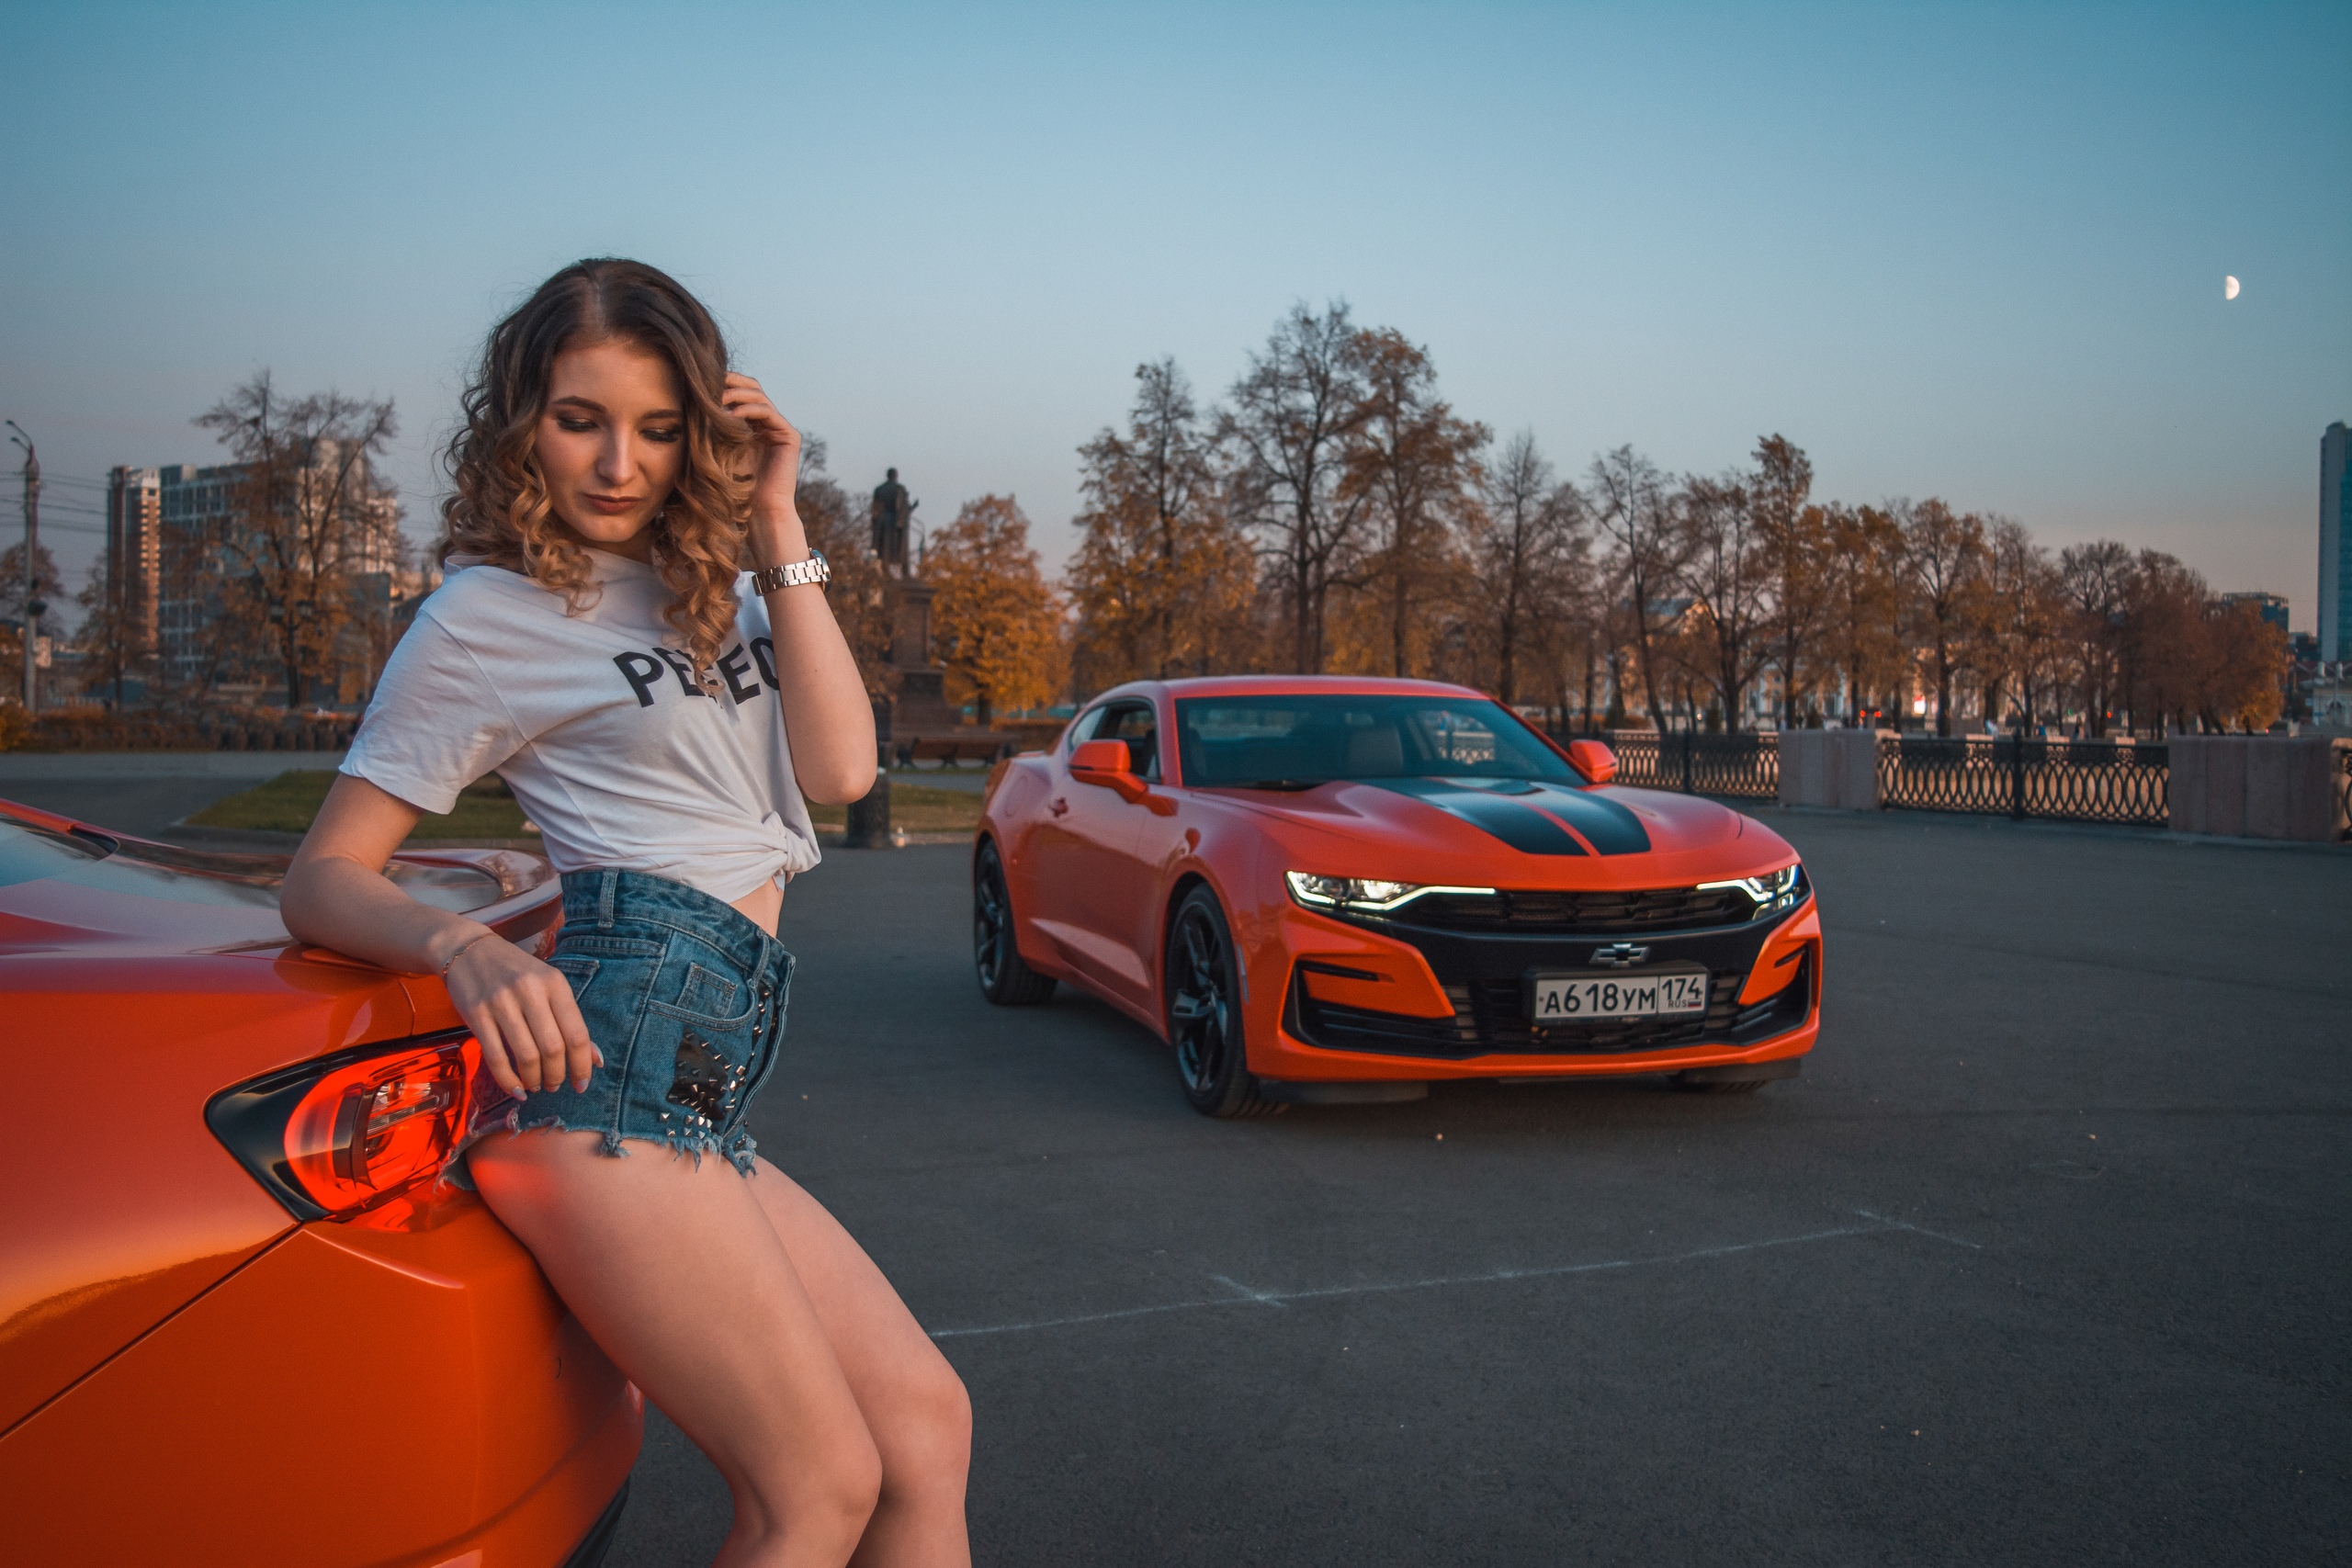 People 2560x1707 women women with cars curly hair trees sky women outdoors building white t-shirt watch Moon Chevrolet red cars car vehicle Chevrolet Camaro muscle cars American women